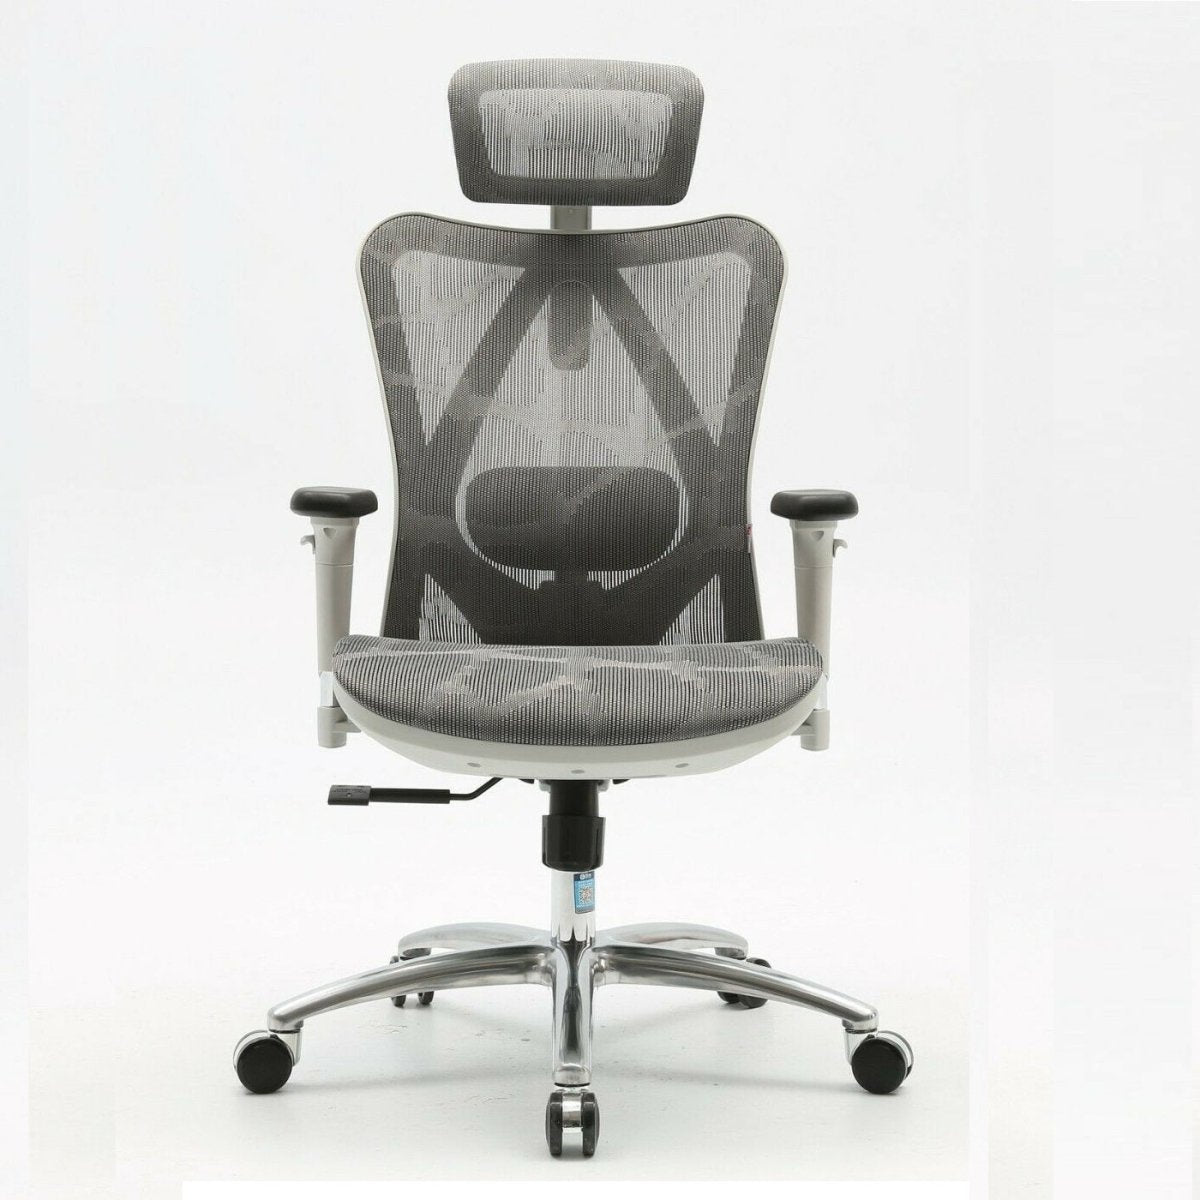 Sihoo M57 Ergonomic Office Chair with Adjustable Back - Grey